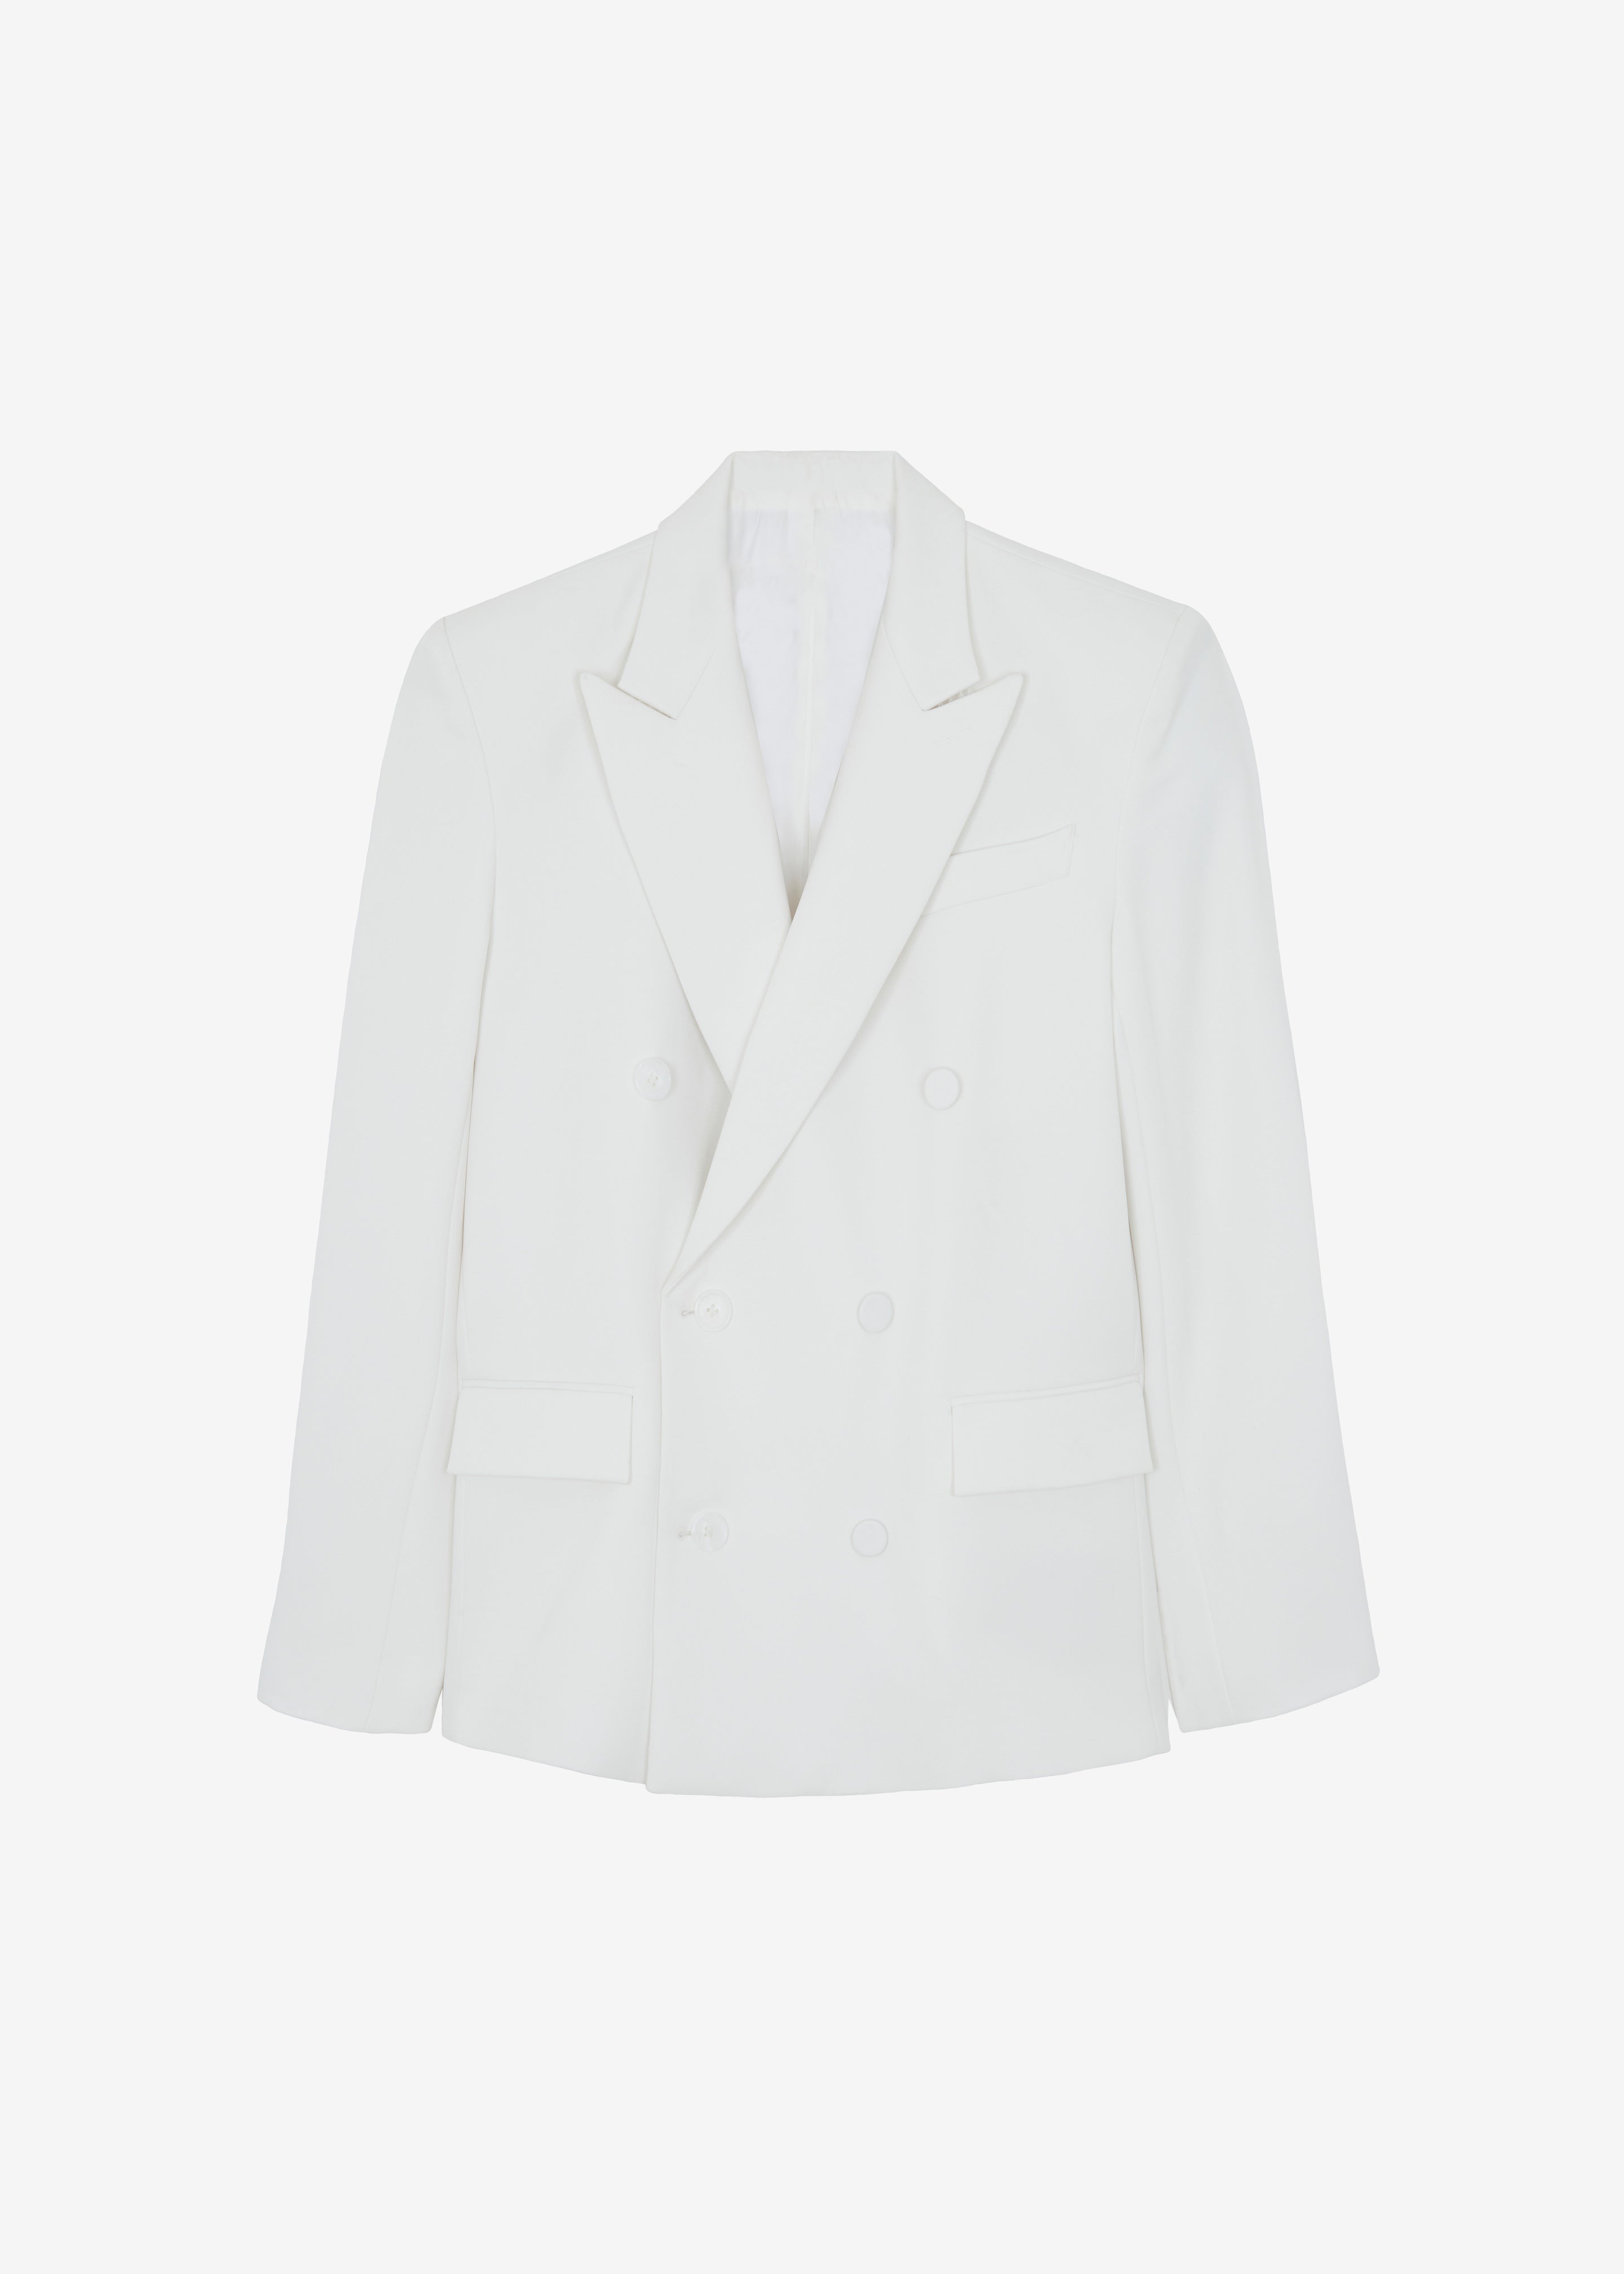 Zia Covered Buttons Blazer - White - 11